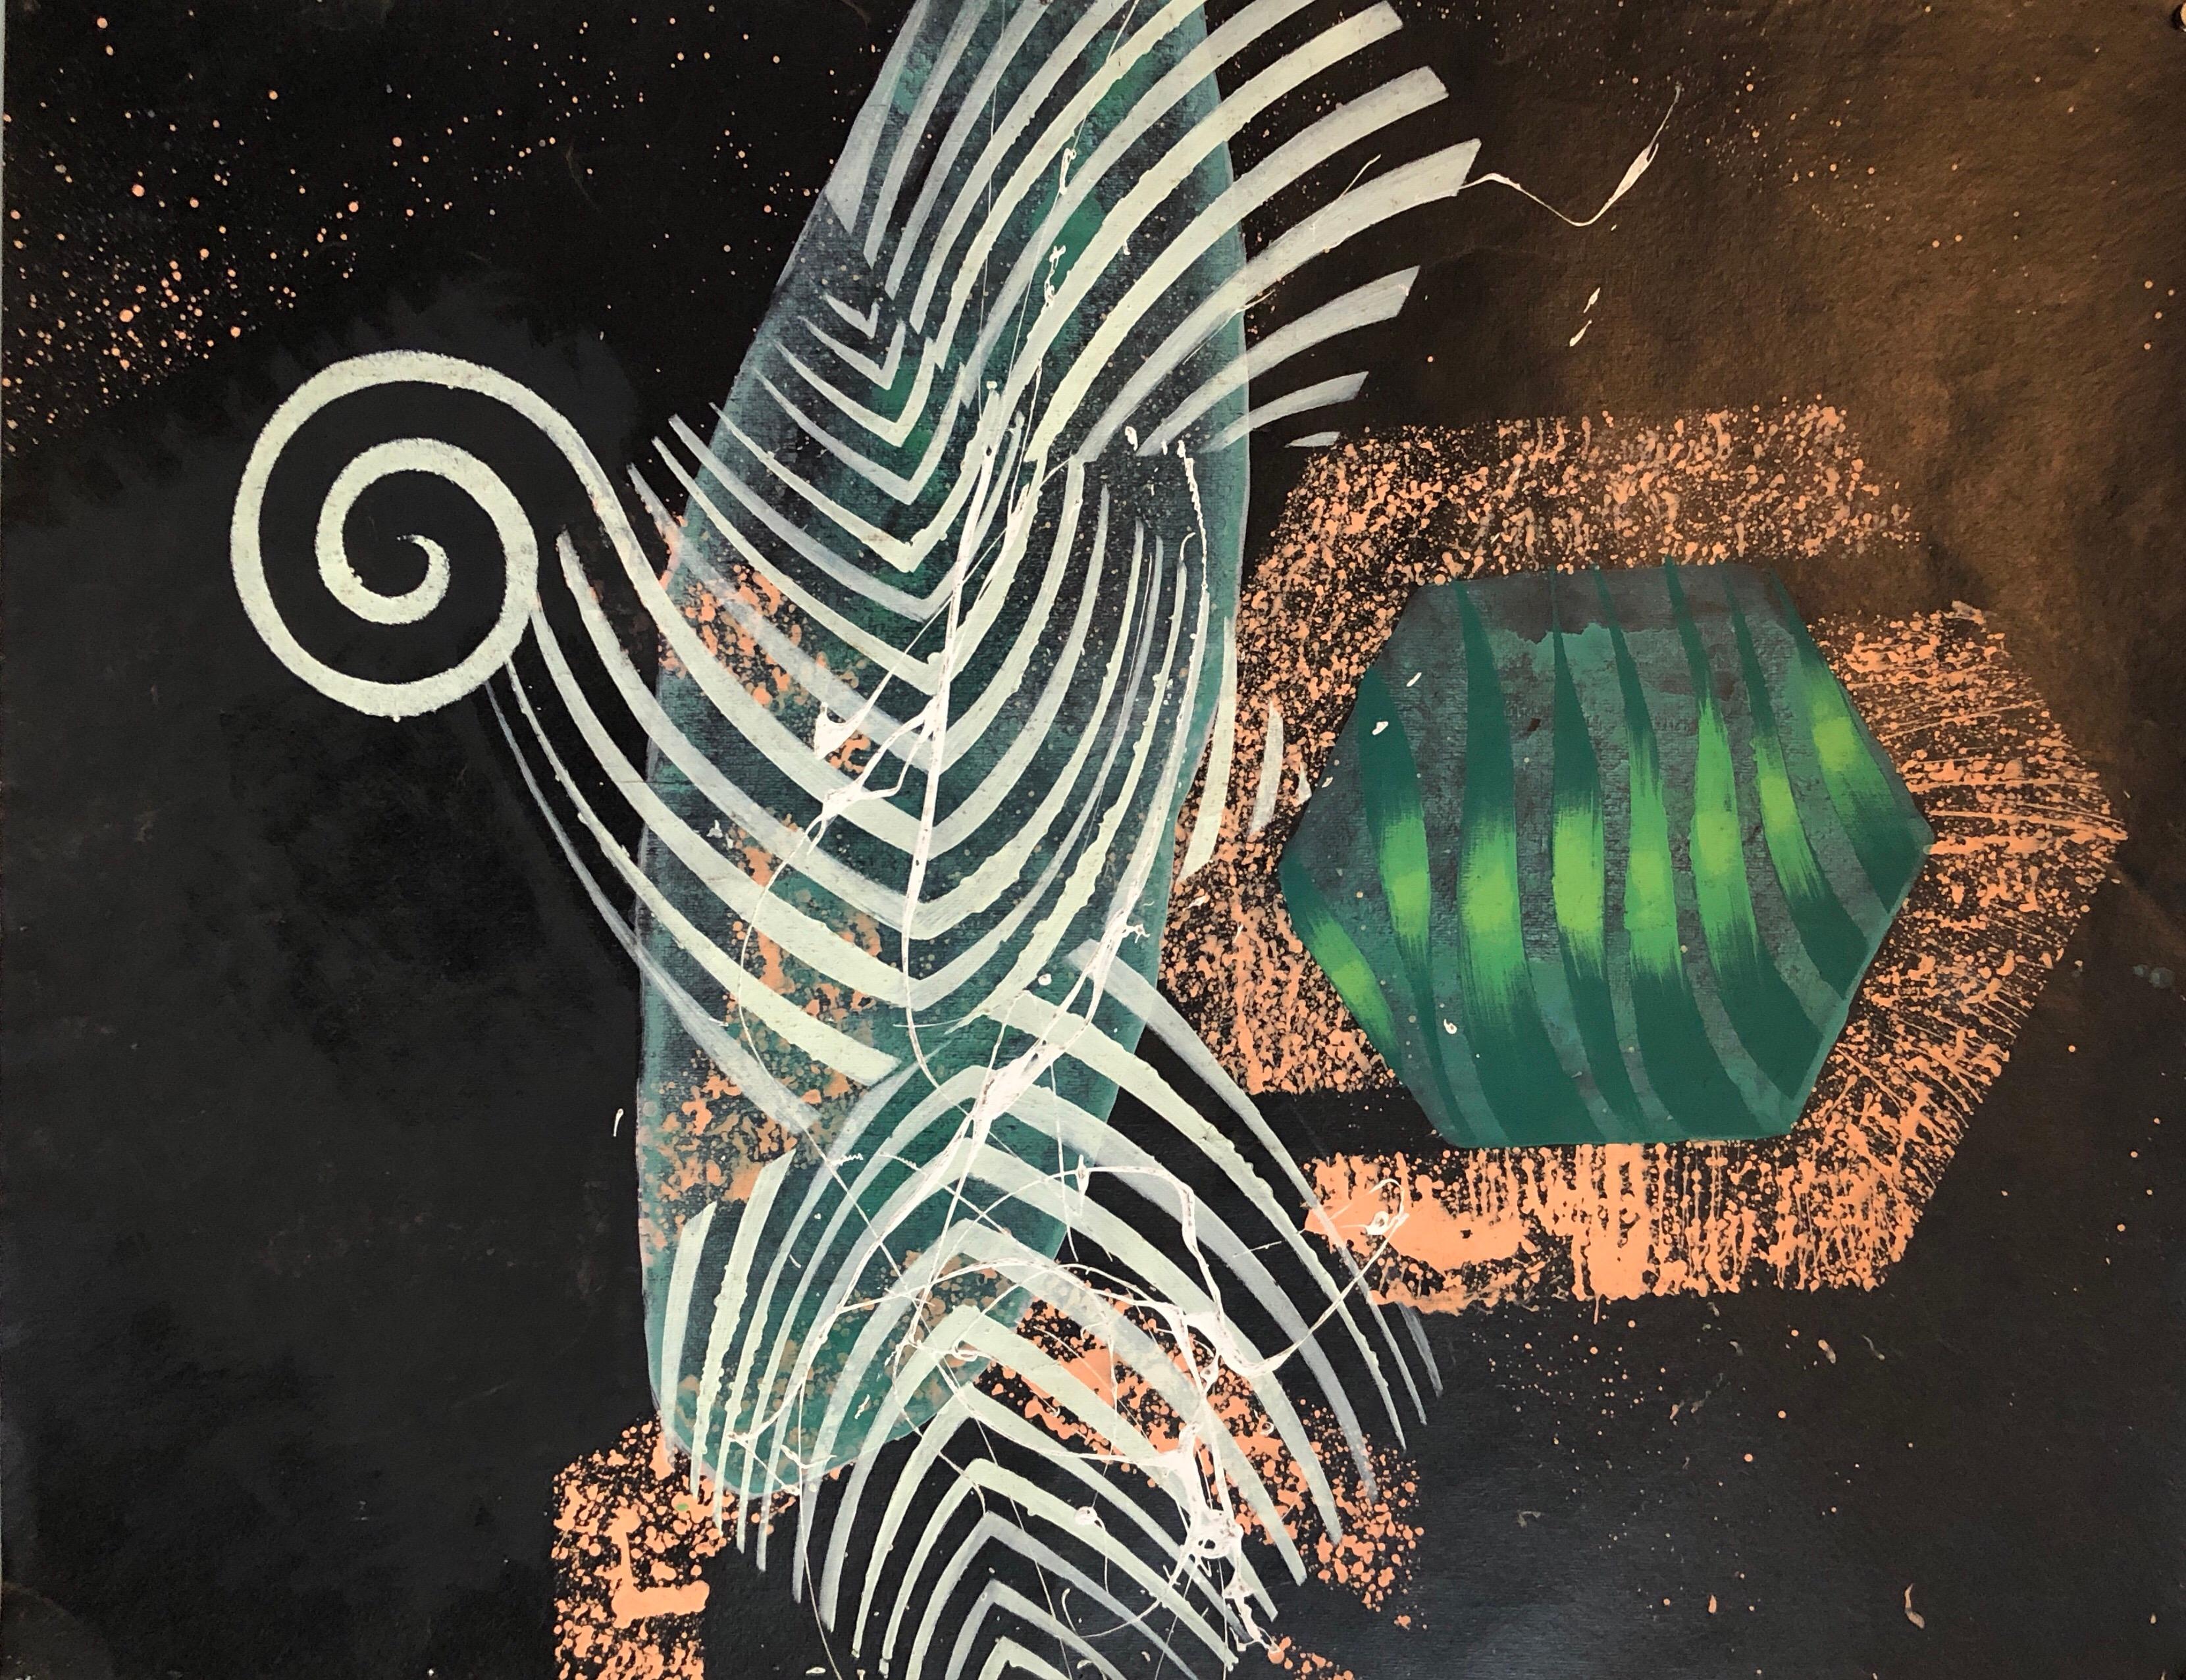 This piece is an abstract tropical landscape. done on tar paper. signed and dated with bright green foliage and a gold colored paint. this piece is on the website of the Pollock Krasner foundation.
It came with a photocopy of a letter from a